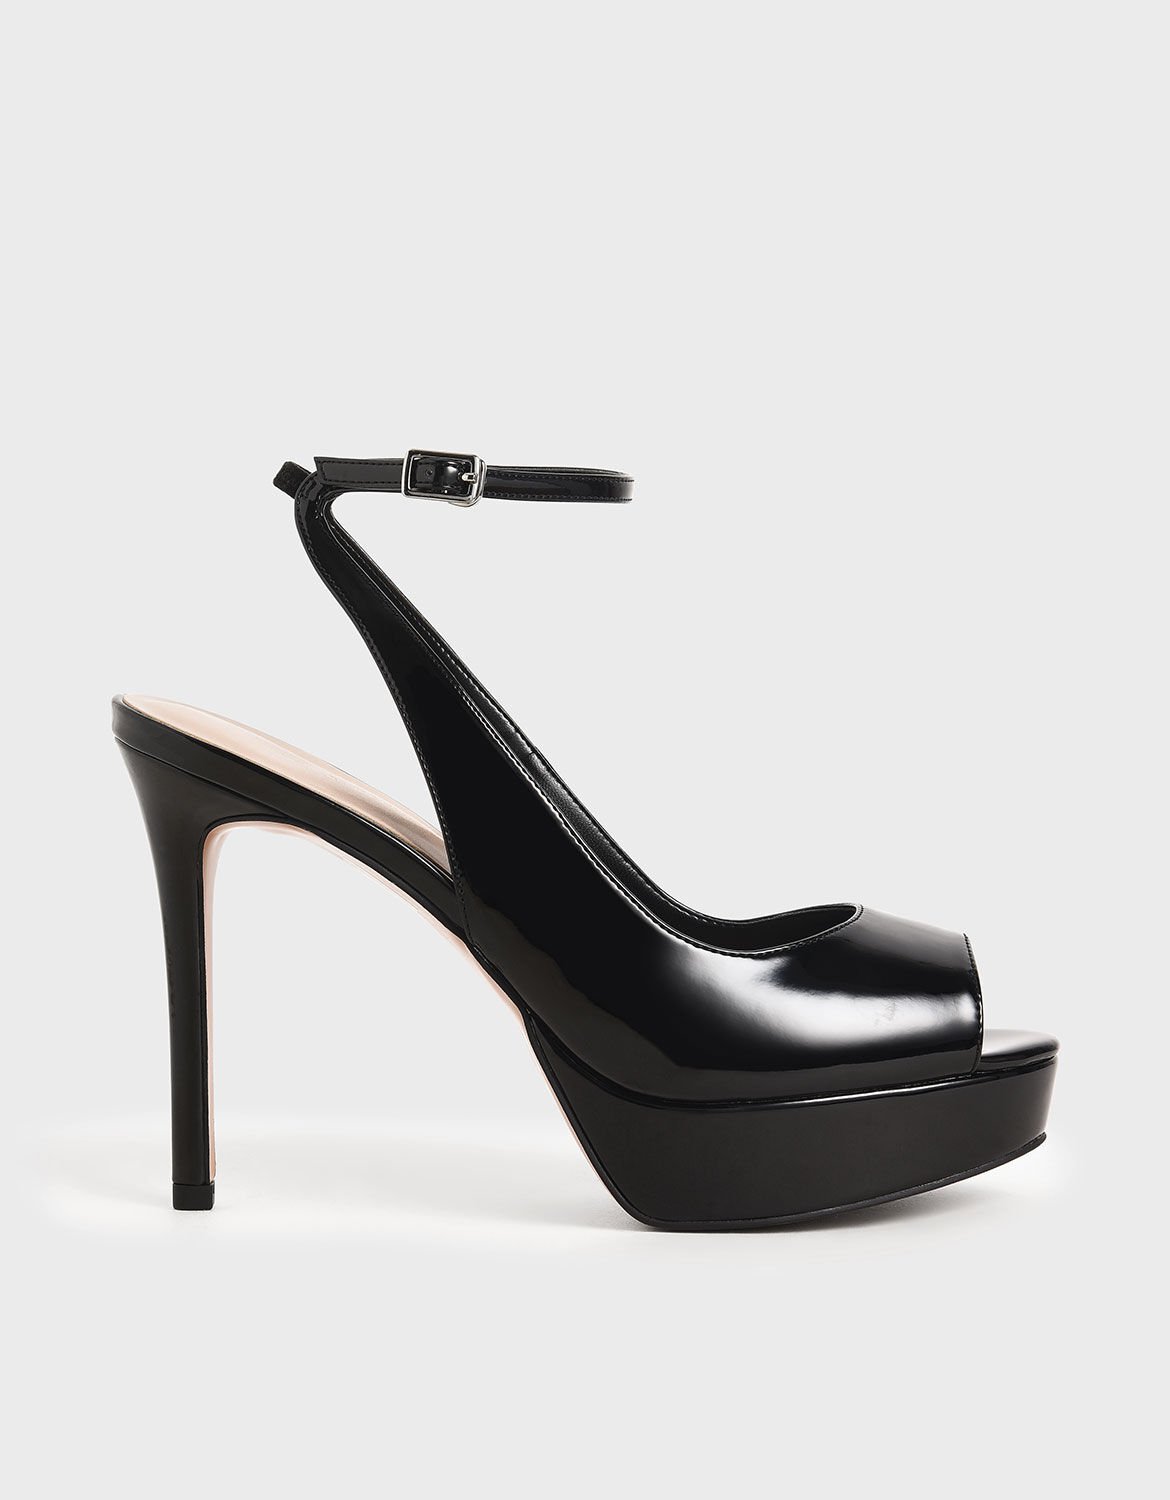 black patent heels with strap